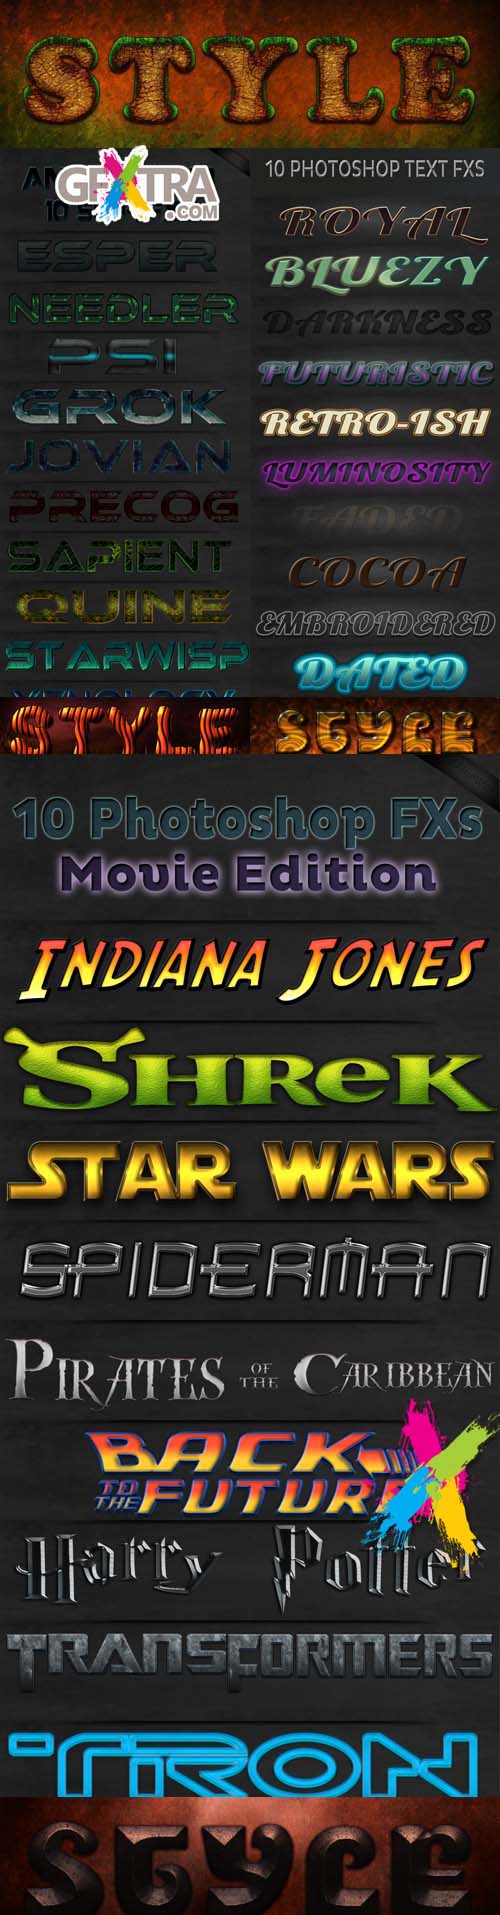 Photoshop Text Styles pack # 6